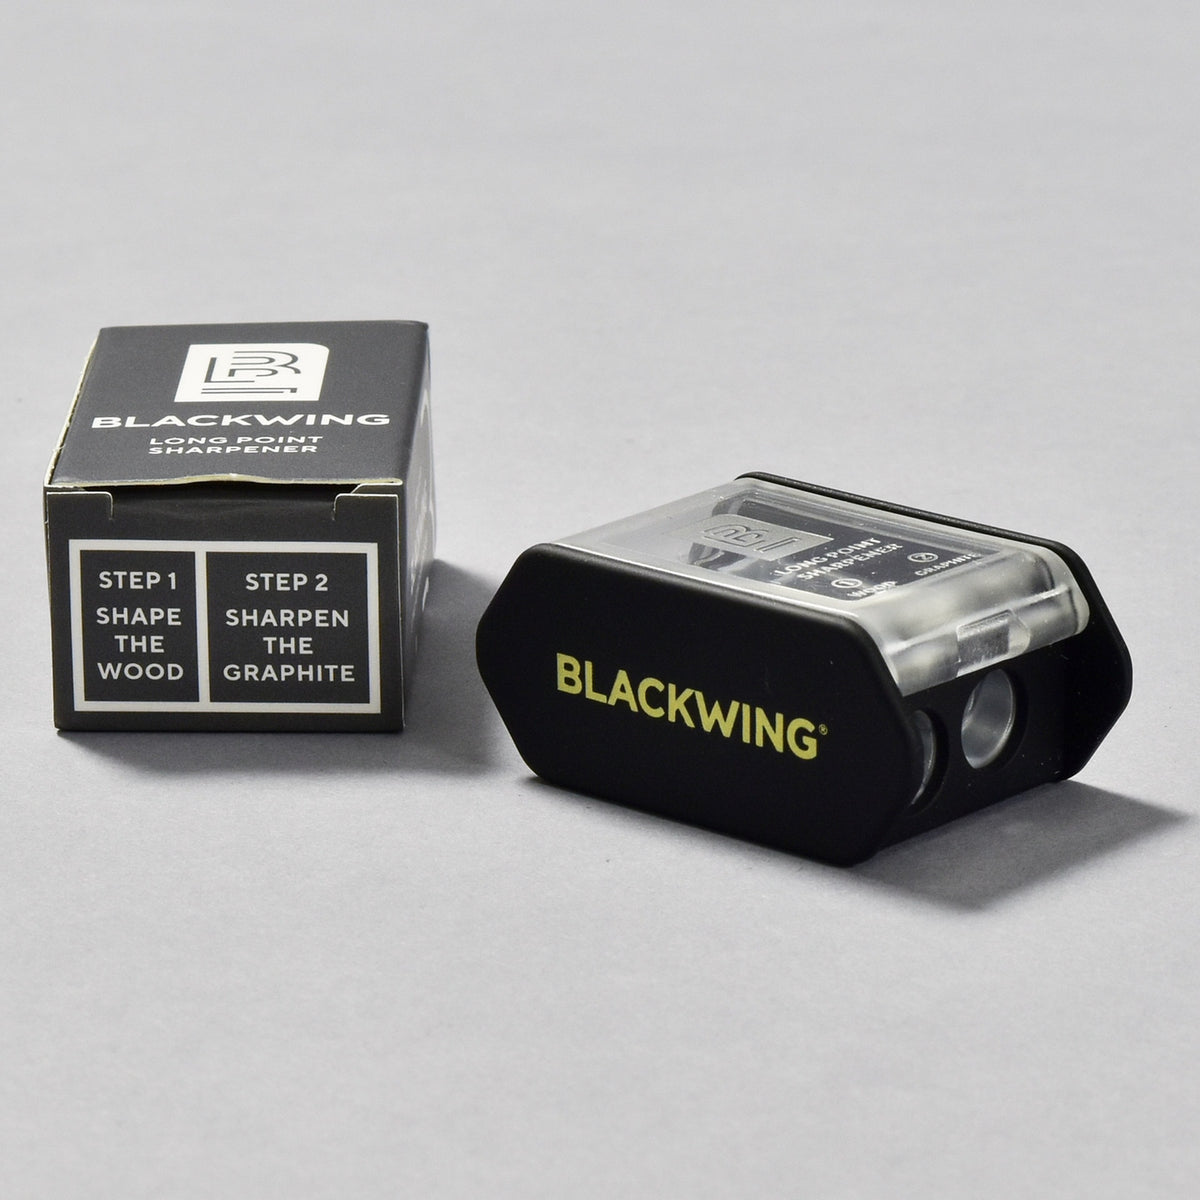 A Palomino Blackwing Long Point Pencil Sharpener with a box next to it.